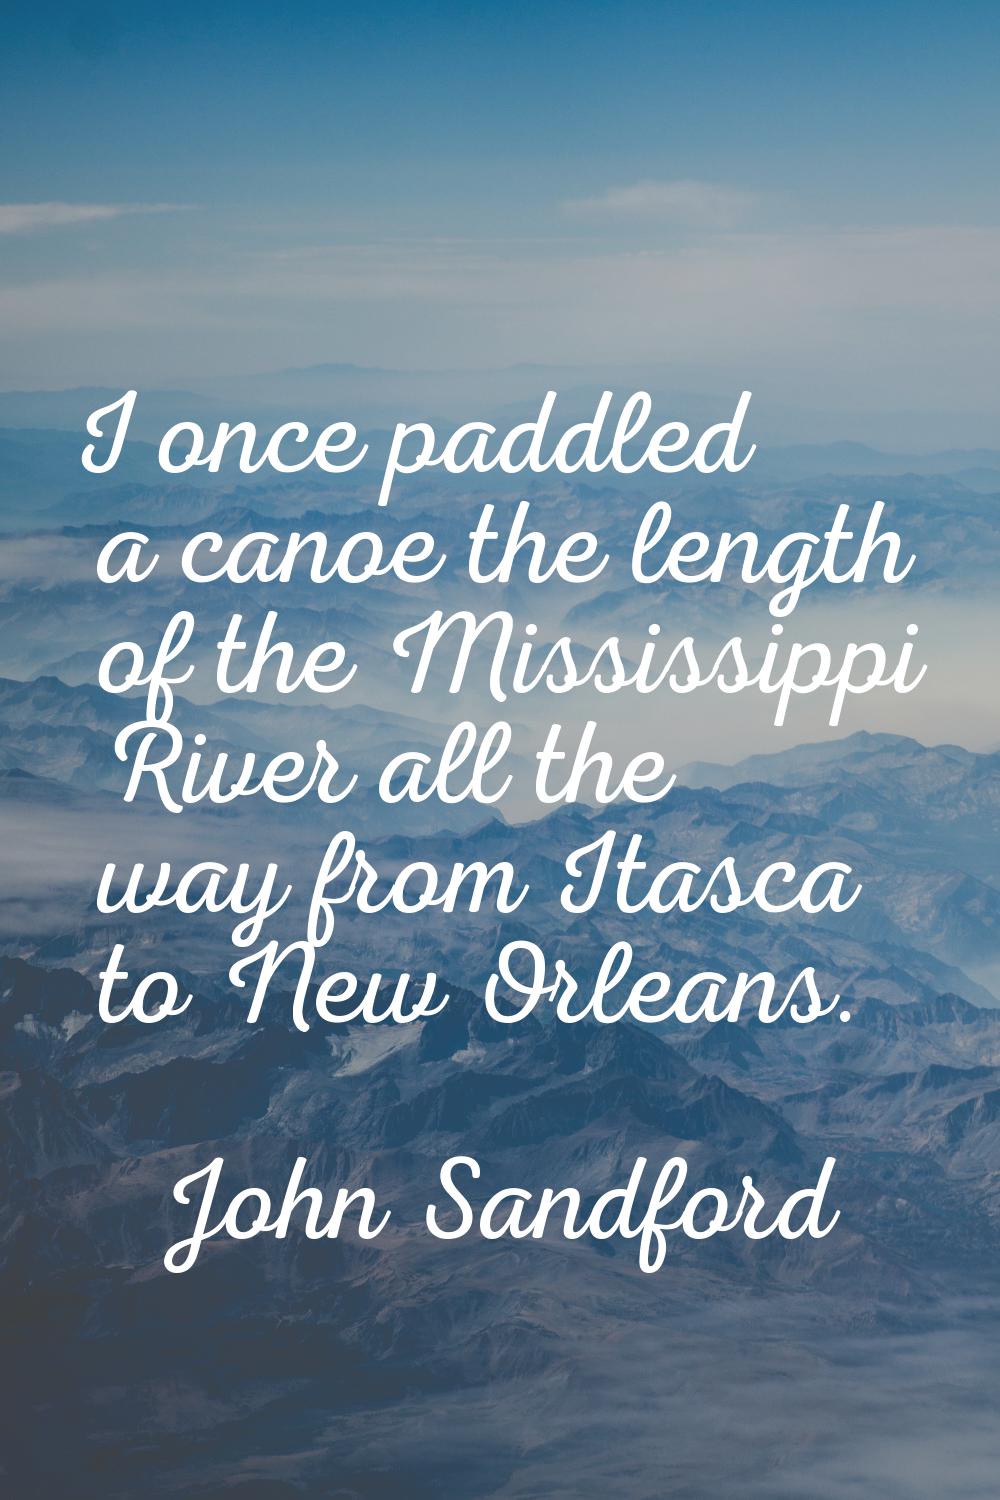 I once paddled a canoe the length of the Mississippi River all the way from Itasca to New Orleans.